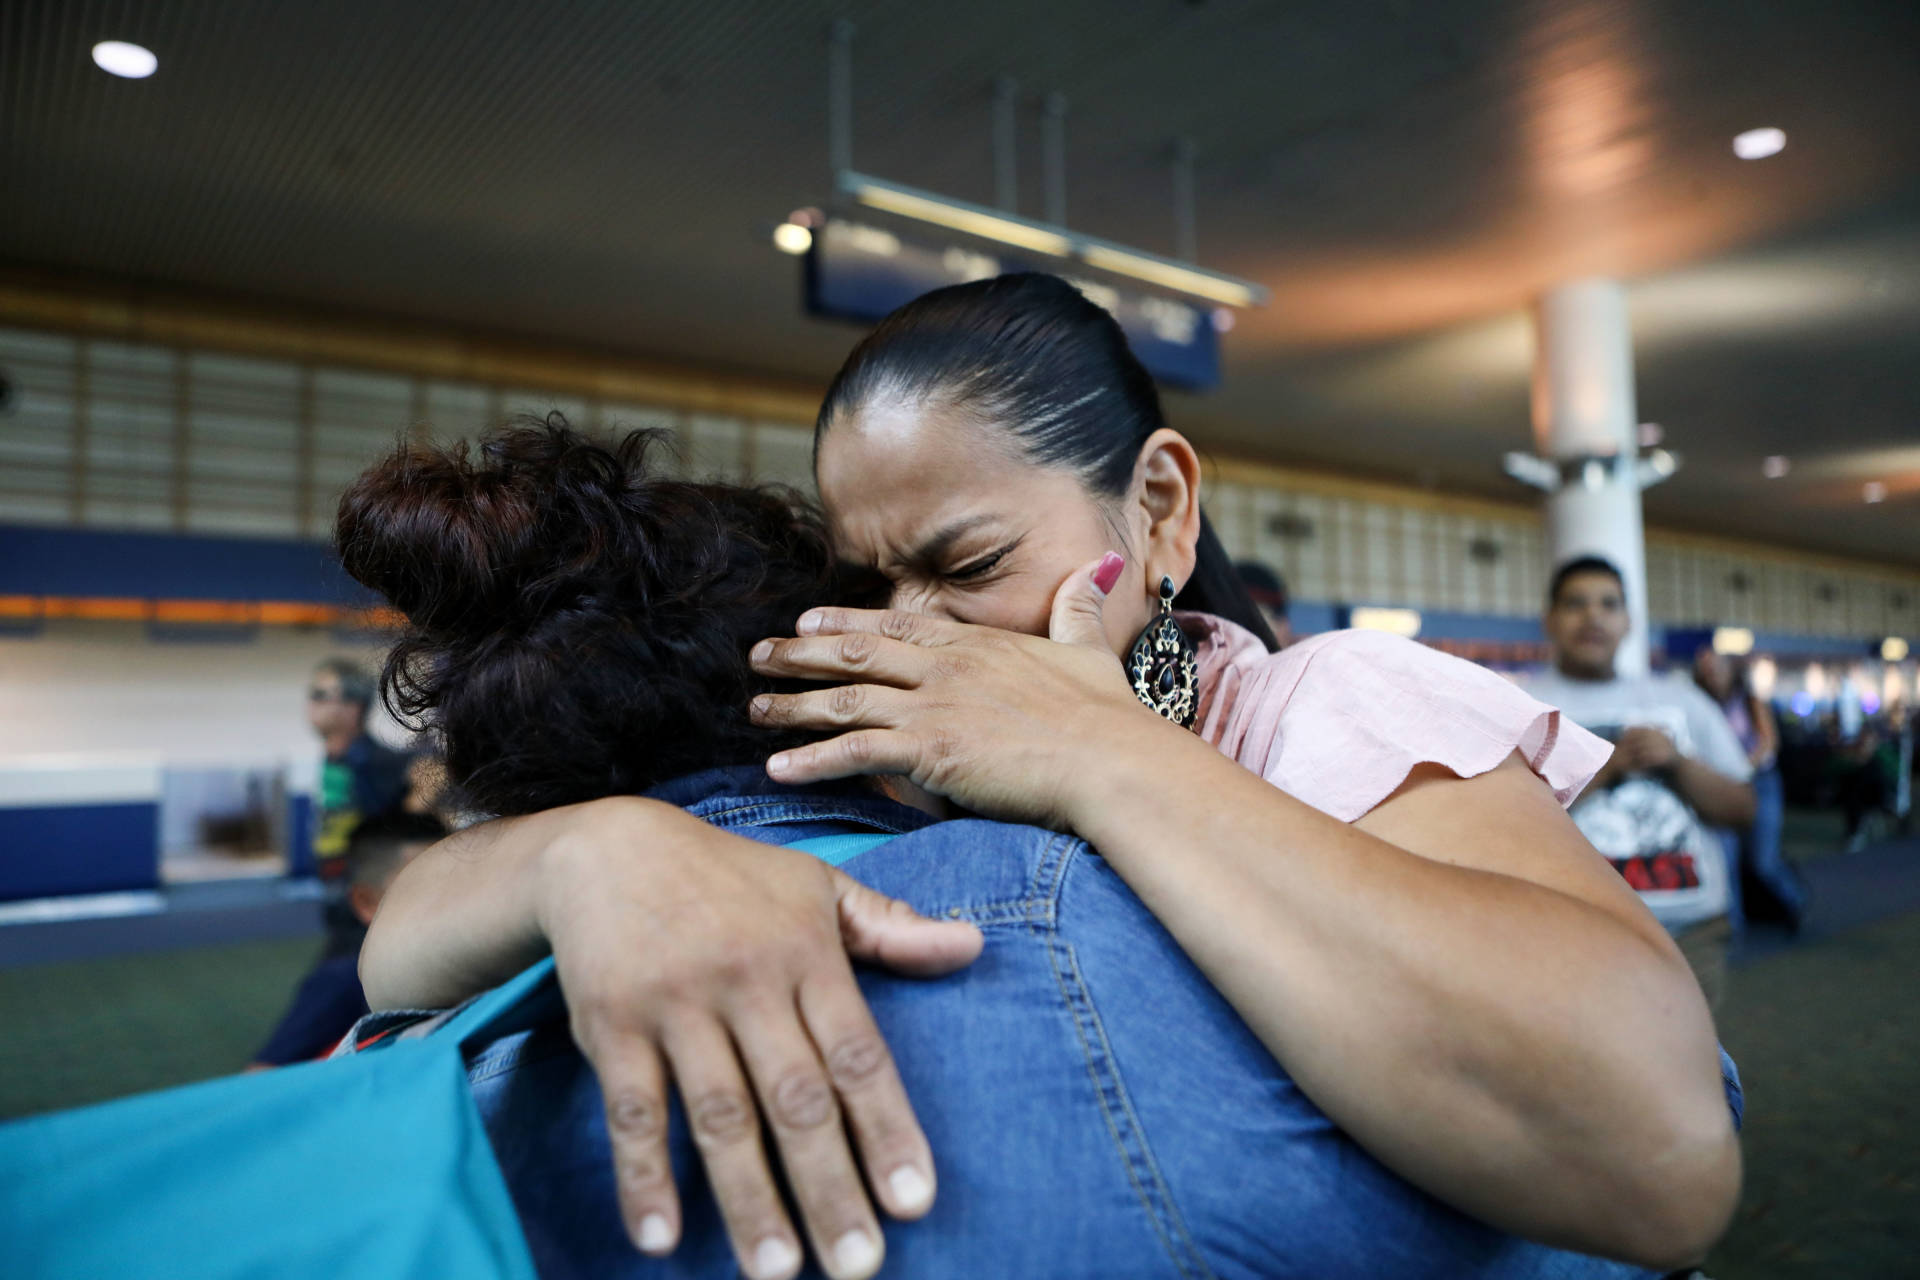 An immigrant who identified herself only as Vioney (L), was released after spending six months in an ICE detention facility. She hugged her sister Yadira while being reunited with family on Sept. 2, 2018, in Oregon. Vioney, originally from Mexico, crossed the San Ysidro Port of Entry with three of her children in February, and asked for asylum. She was separated from her three children the same day and held in detention in California until August 31. Her children, who are U.S. citizens, were immediately freed. A group of mothers known as Immigrant Families Together posted her bond, and she will remain in the country with her family while her case is adjudicated.  Mario Tama/Getty Images